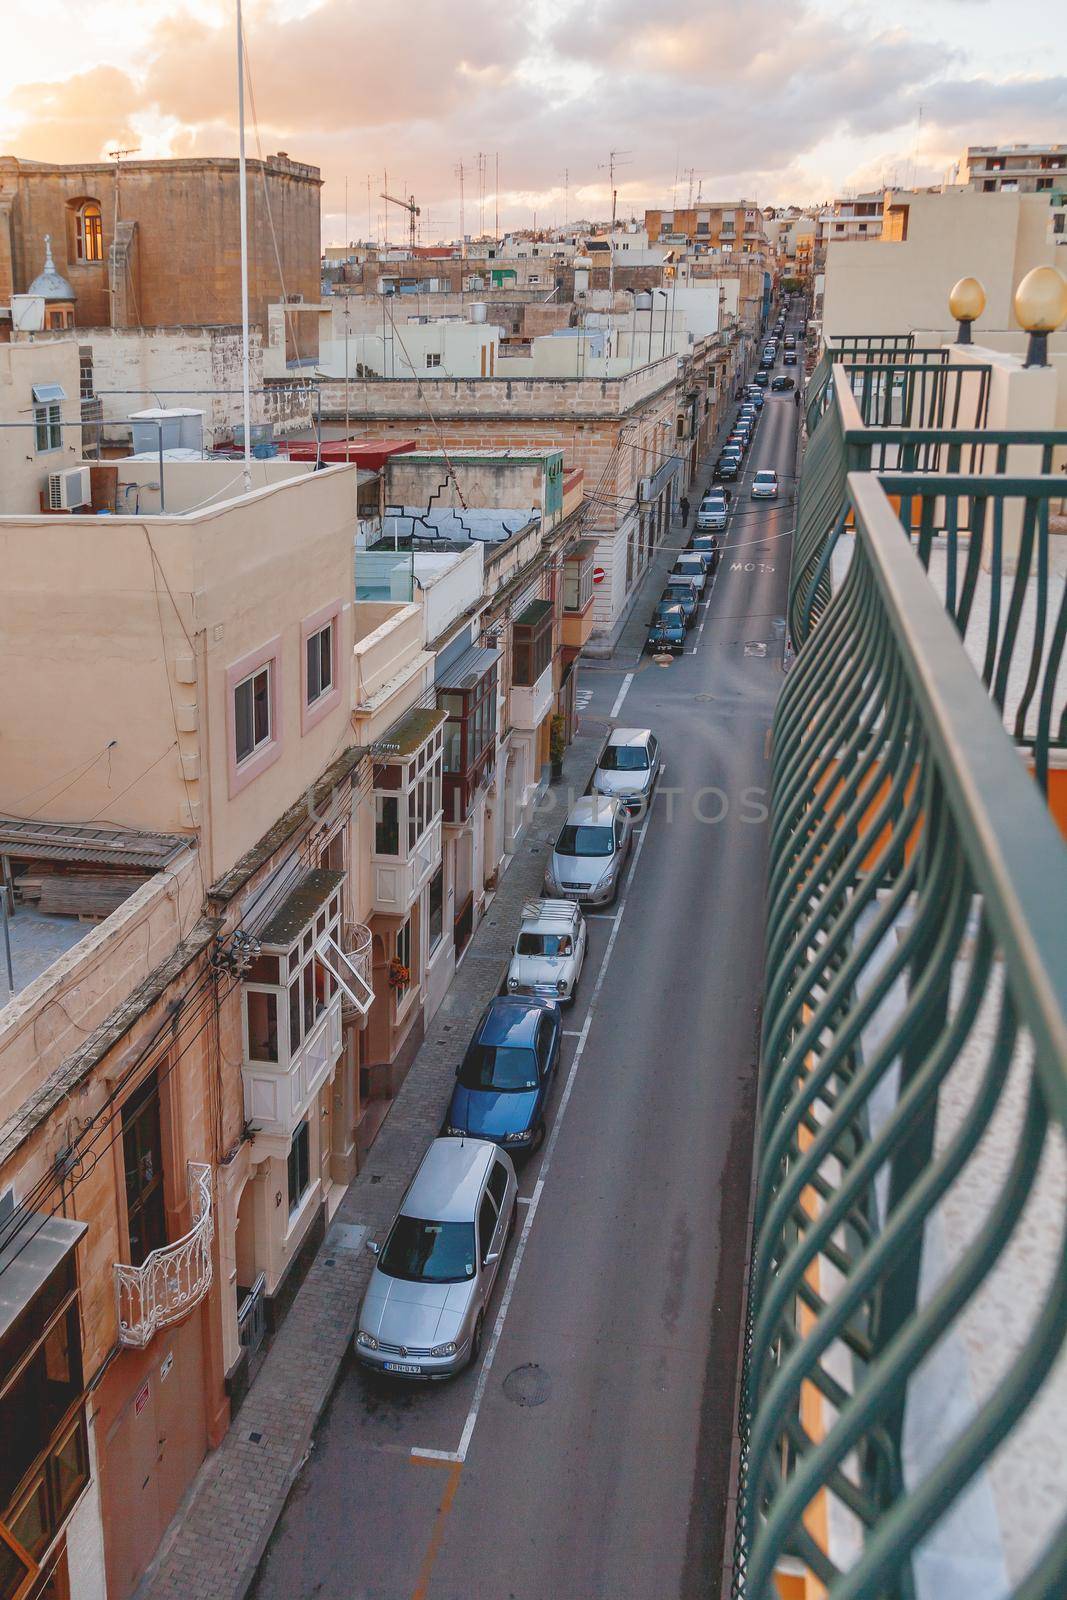 SLIEMA, MALTA - February 12, 2010. Cars are parked along the street. View on town from third floor of building.